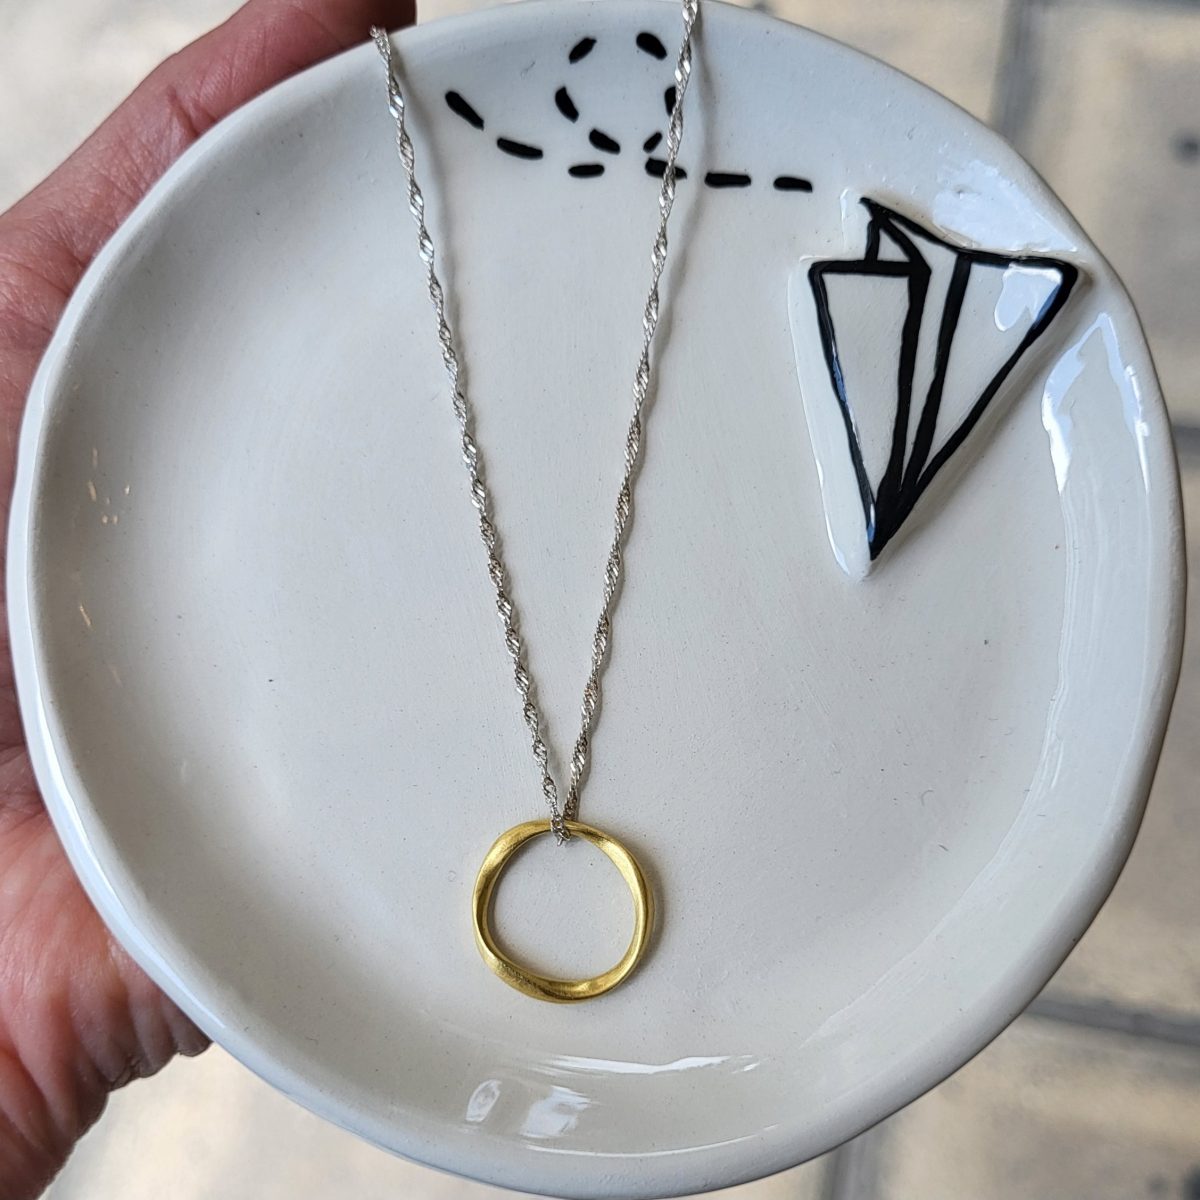 Gold and Silver Melted Wax Necklace by Xoutou's